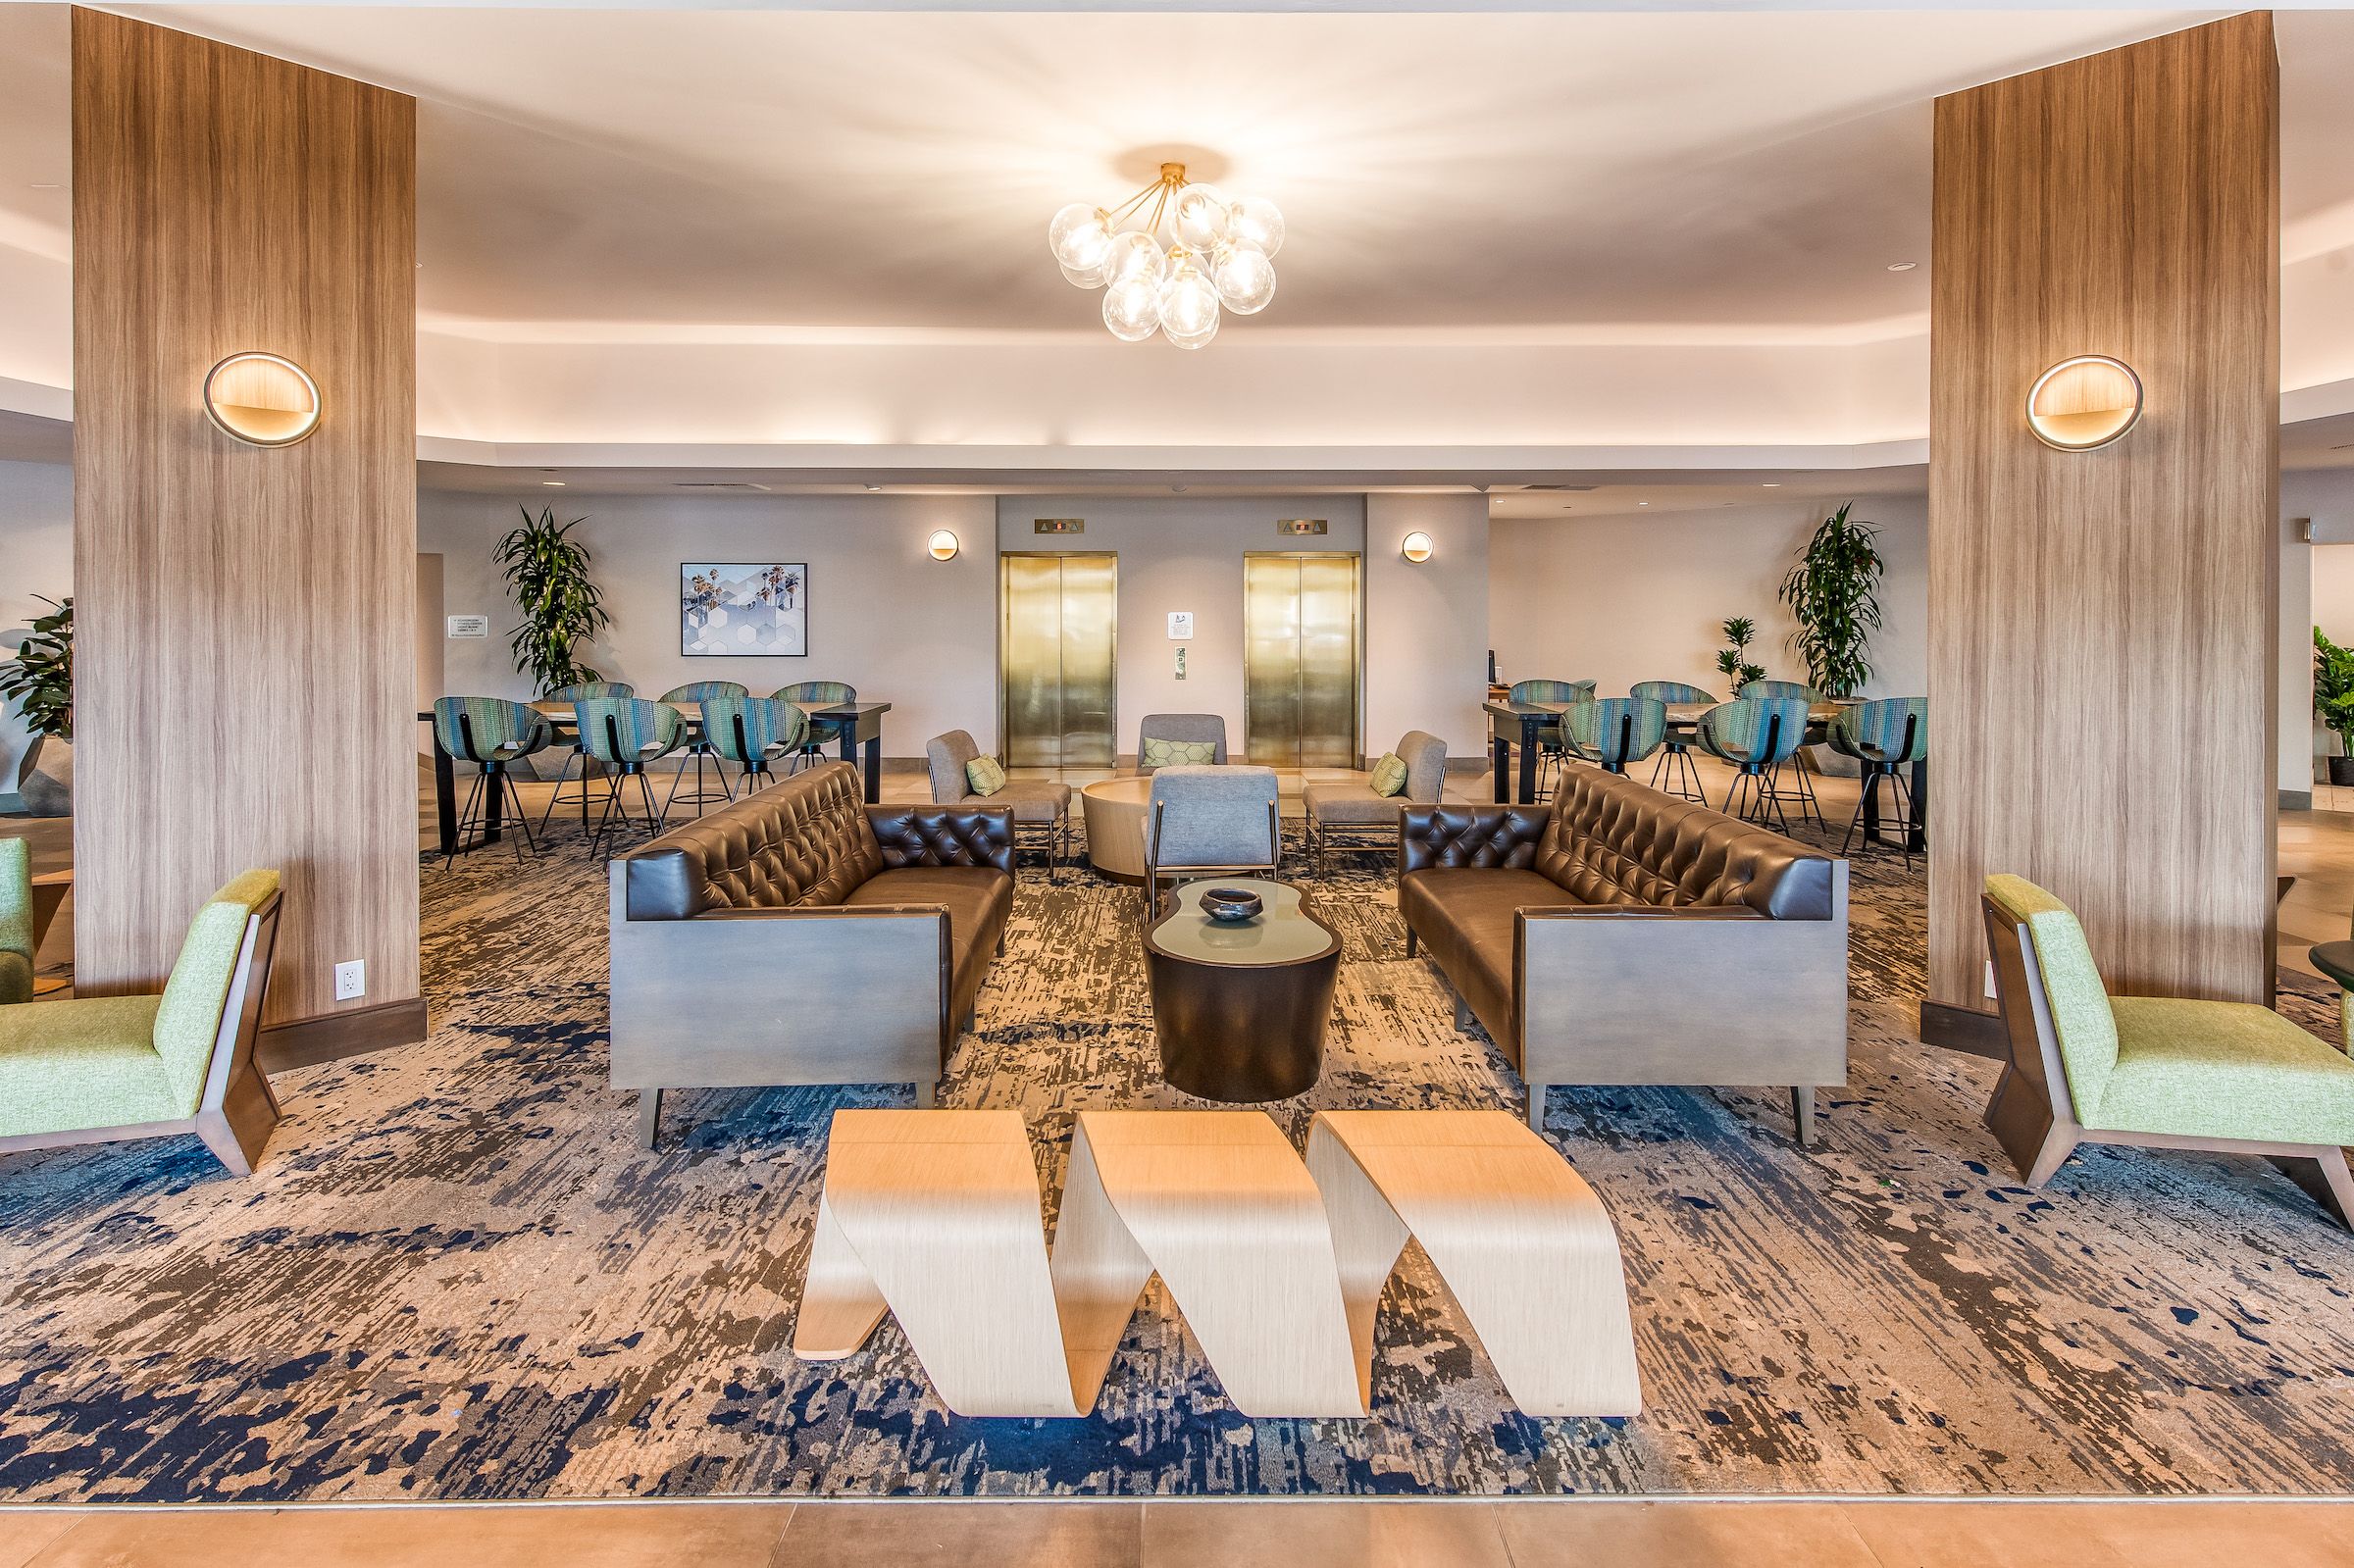 DoubleTree by Hilton Carson Shines With All-New Property Renovations - New Lobby Area Photo